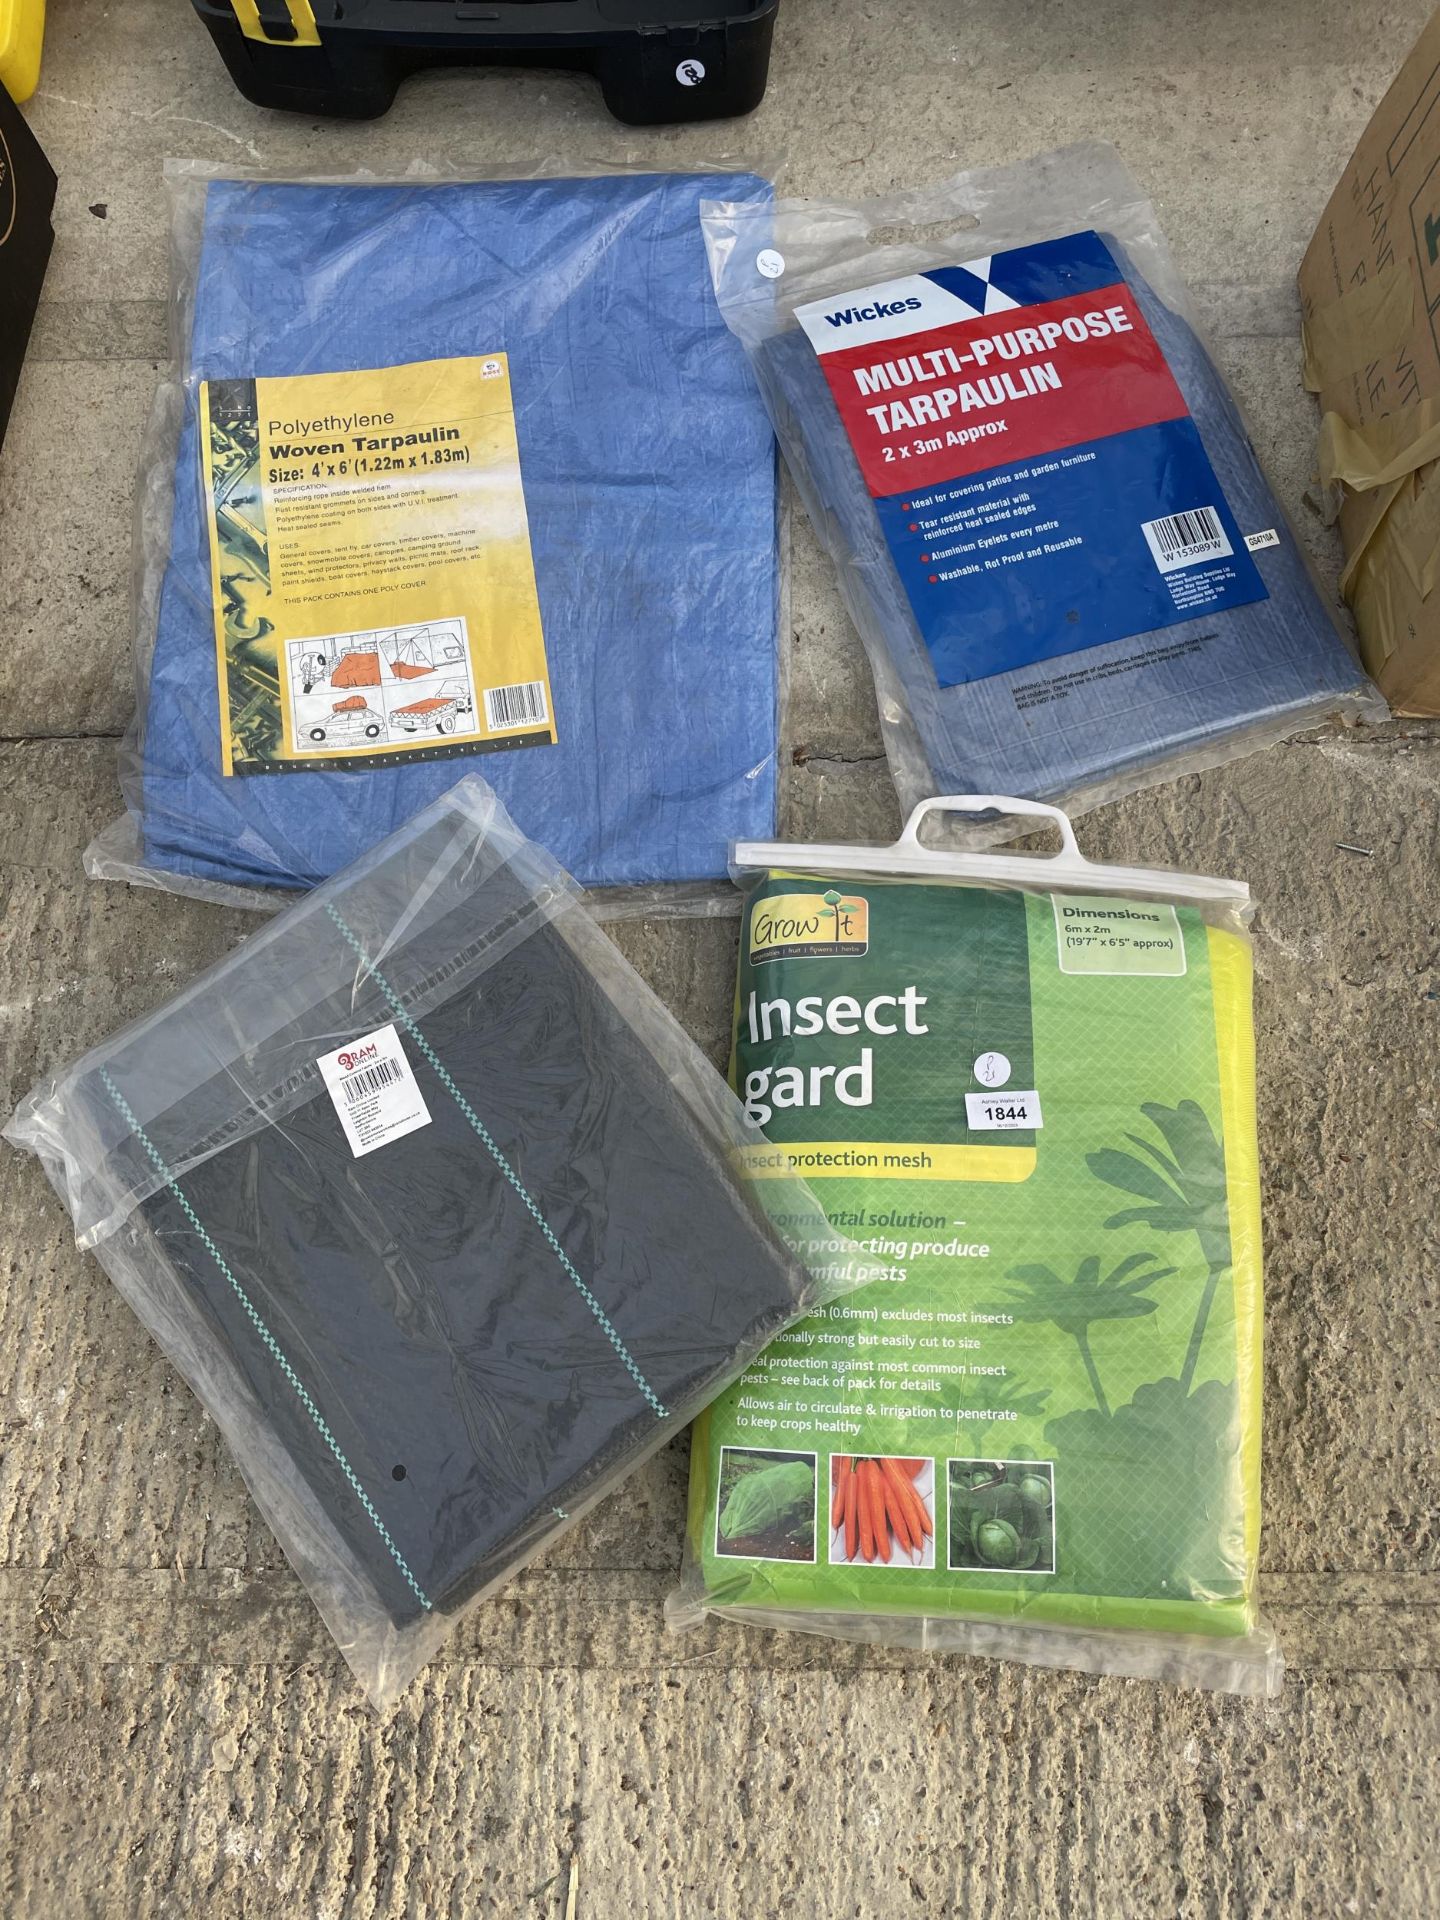 THREE NEW AND PACKAGED TARPUALIN SHEETS AND AN INSECT GUARD